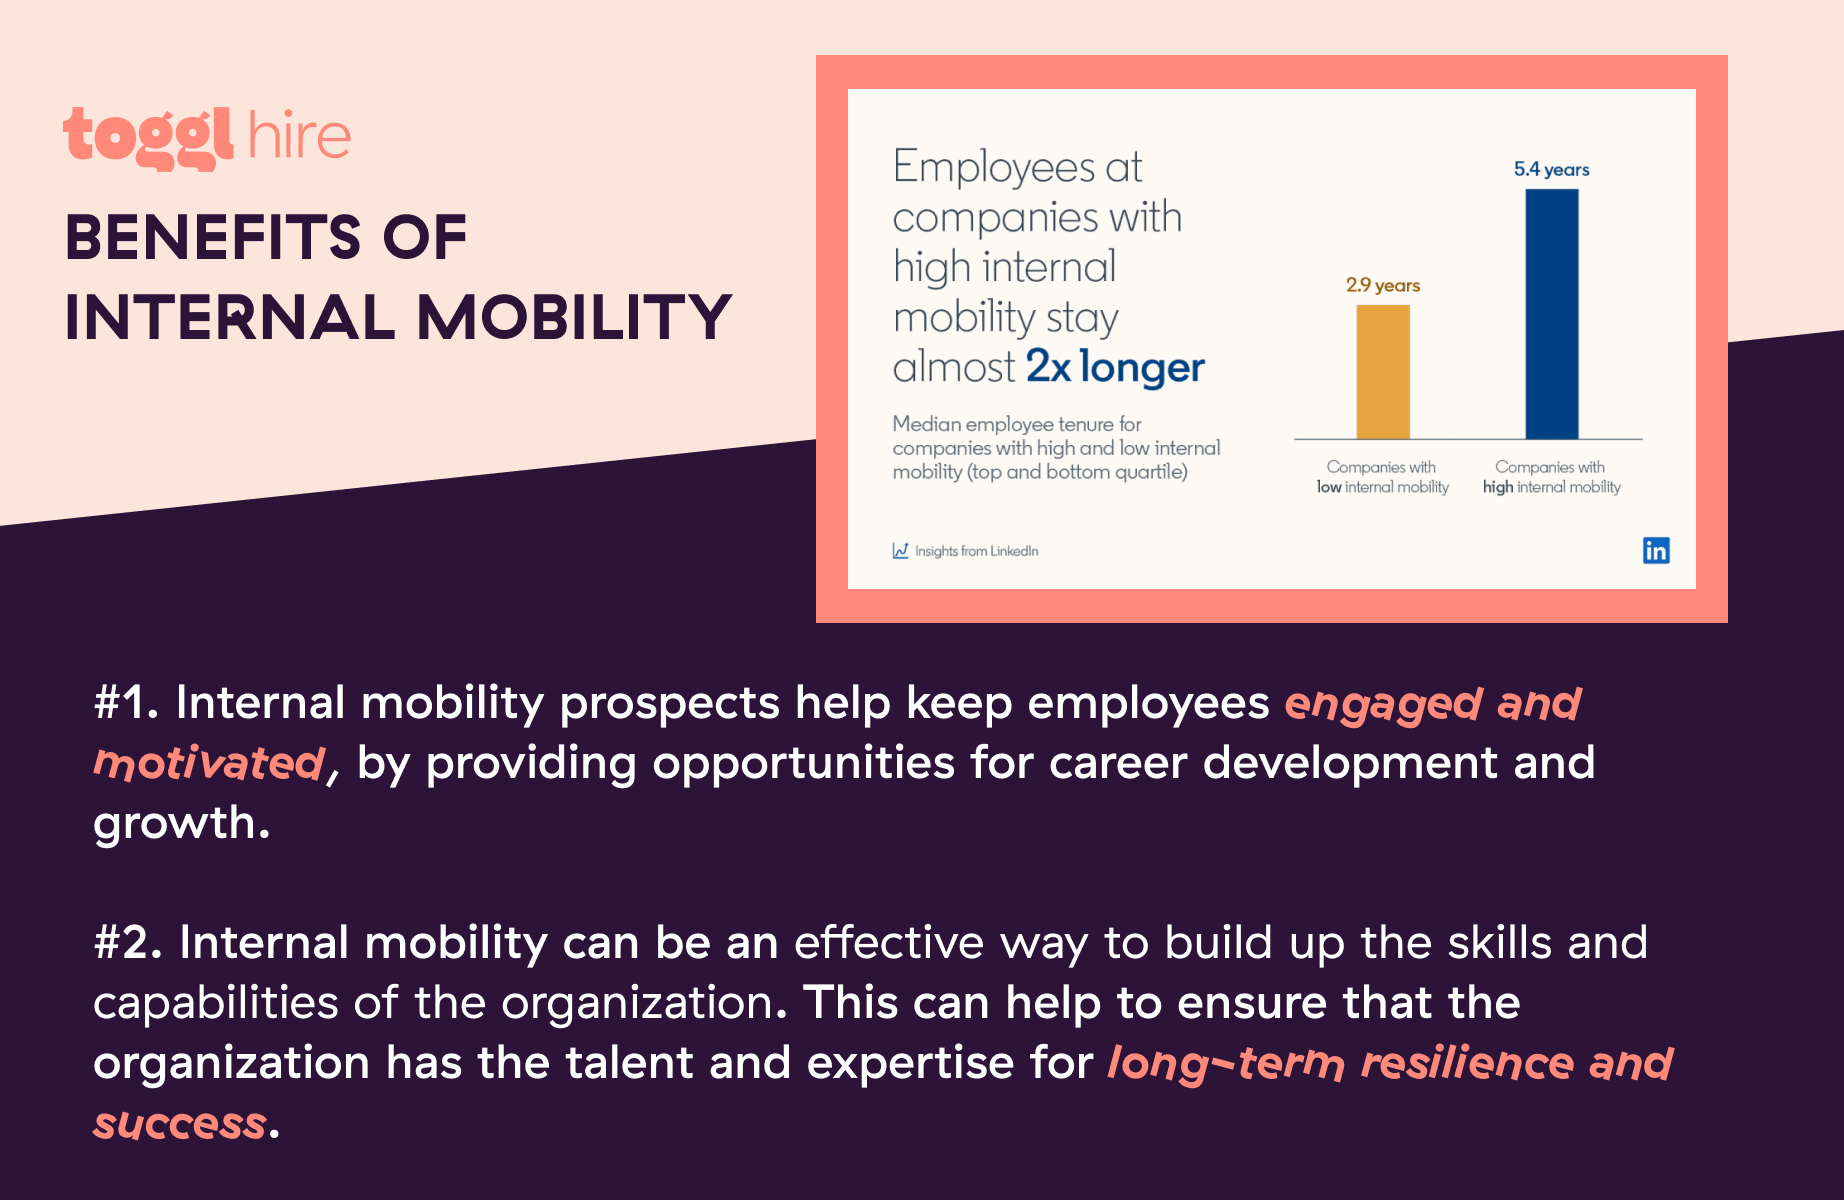 There are several tangible benefits of building an internal mobility program.